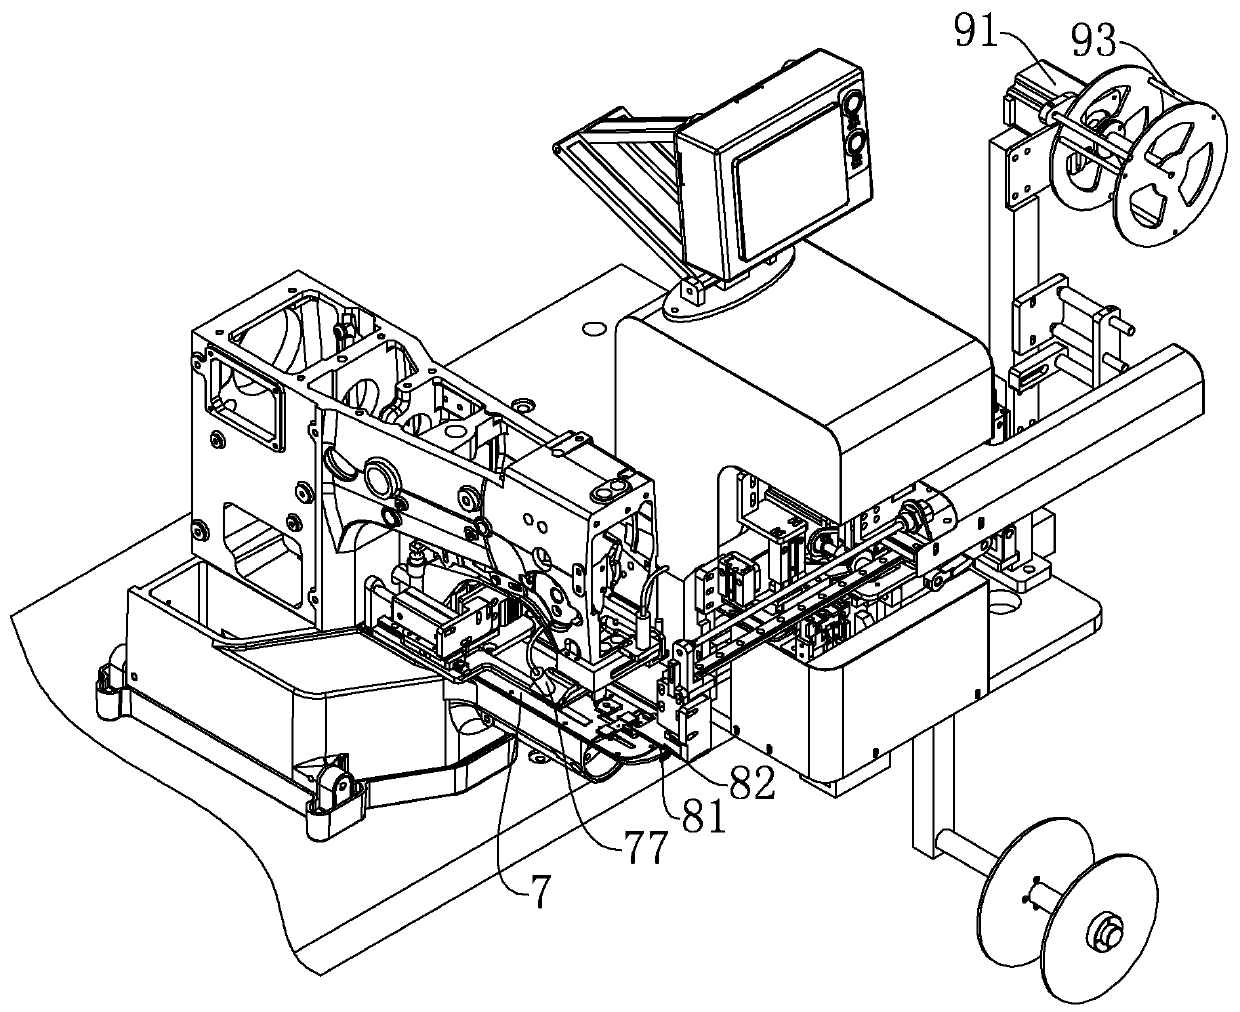 Material folding mechanism of bottom crotch attaching sewing machine